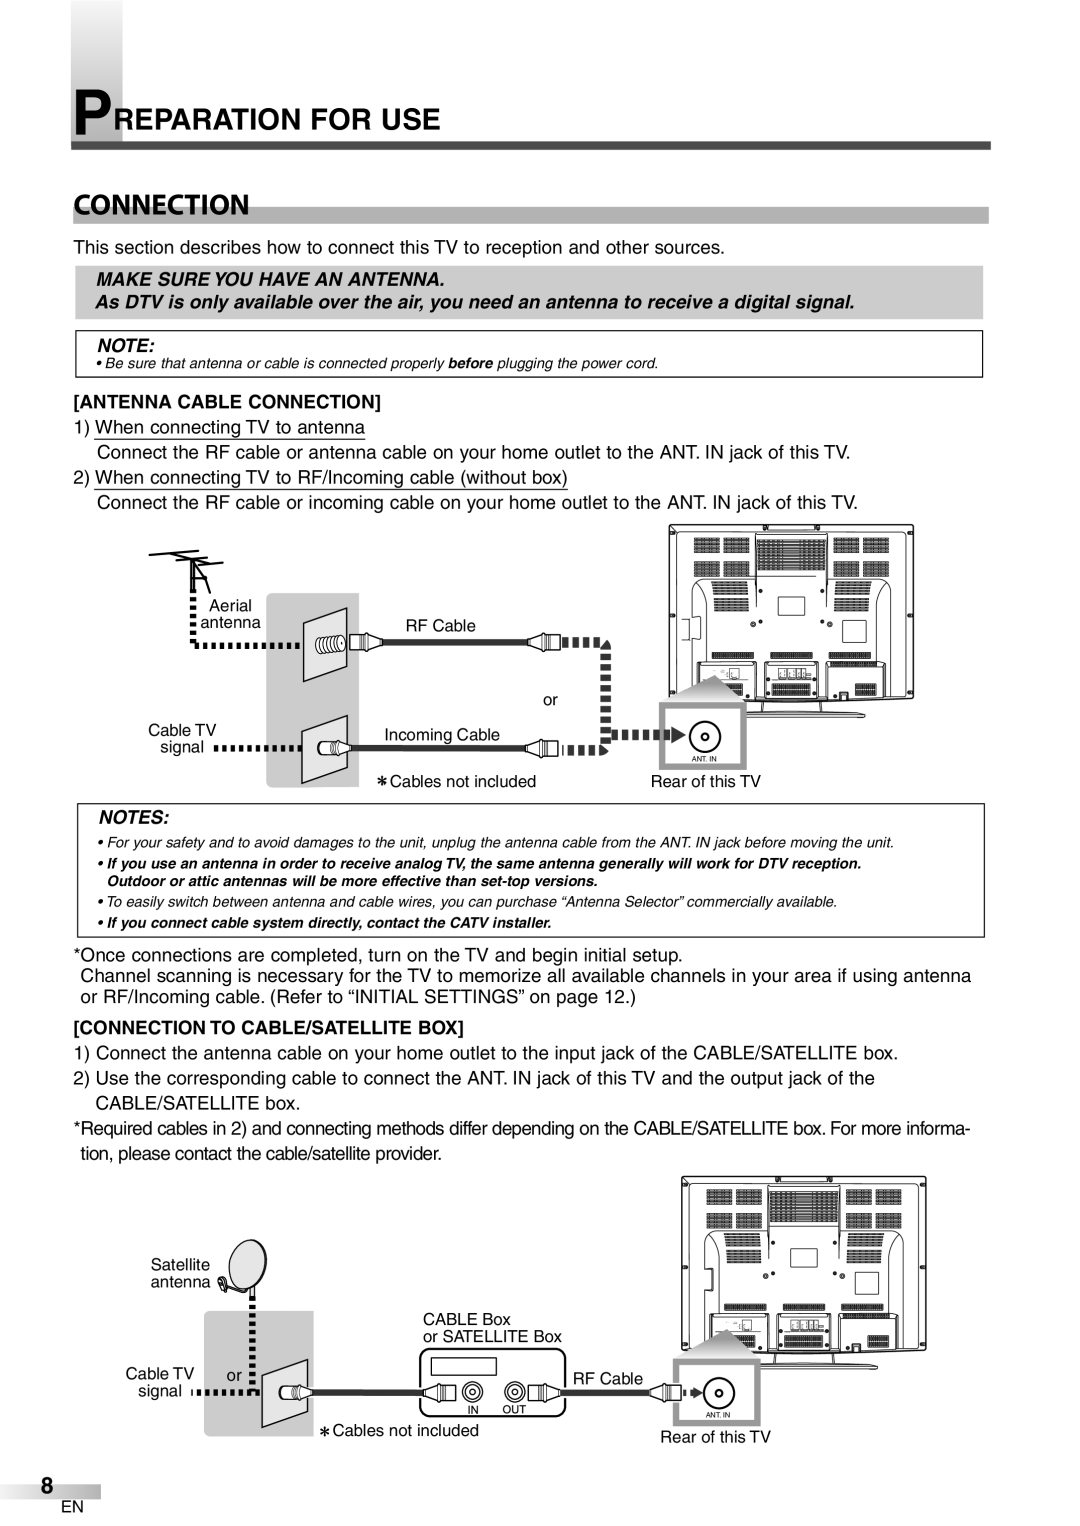 Symphonic WF32L6 owner manual Preparation For Use, Make Sure You Have An Antenna, Antenna Cable Connection 